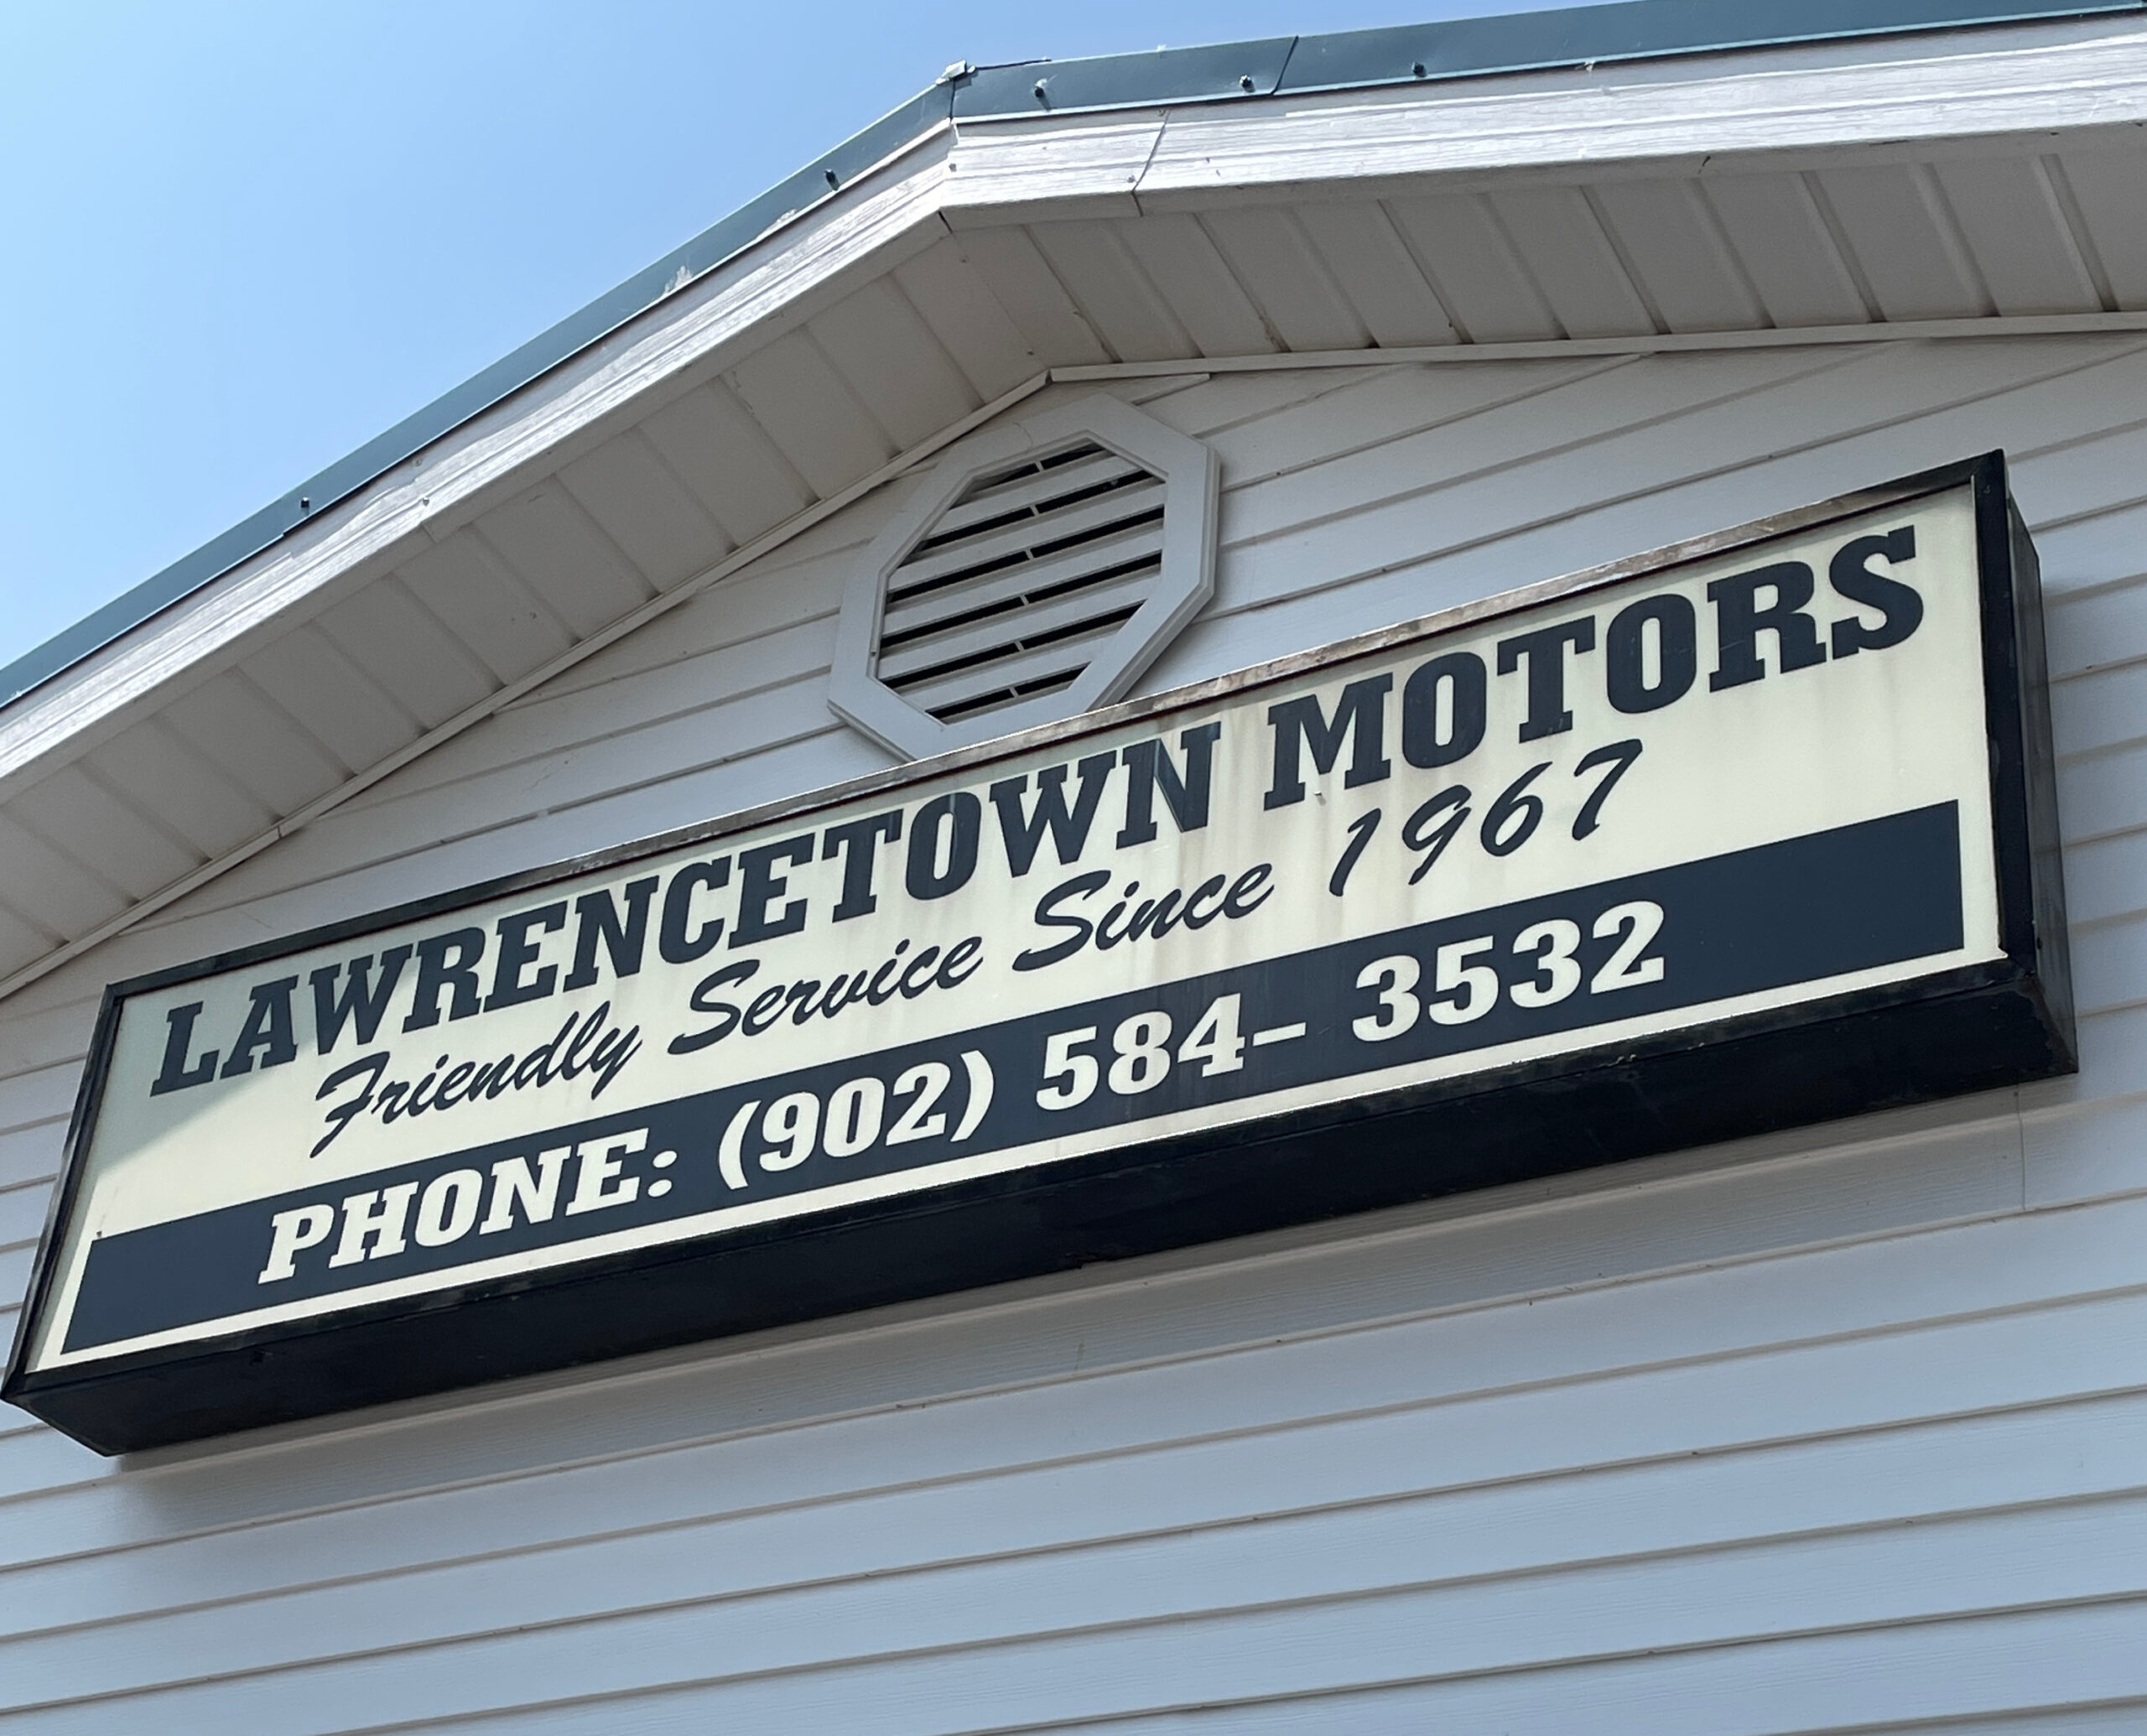 A white sign with blue text on the side of a white building reads "Lawrencetown Motors, Friendly Service since 1967. Phone 902-584-3532"